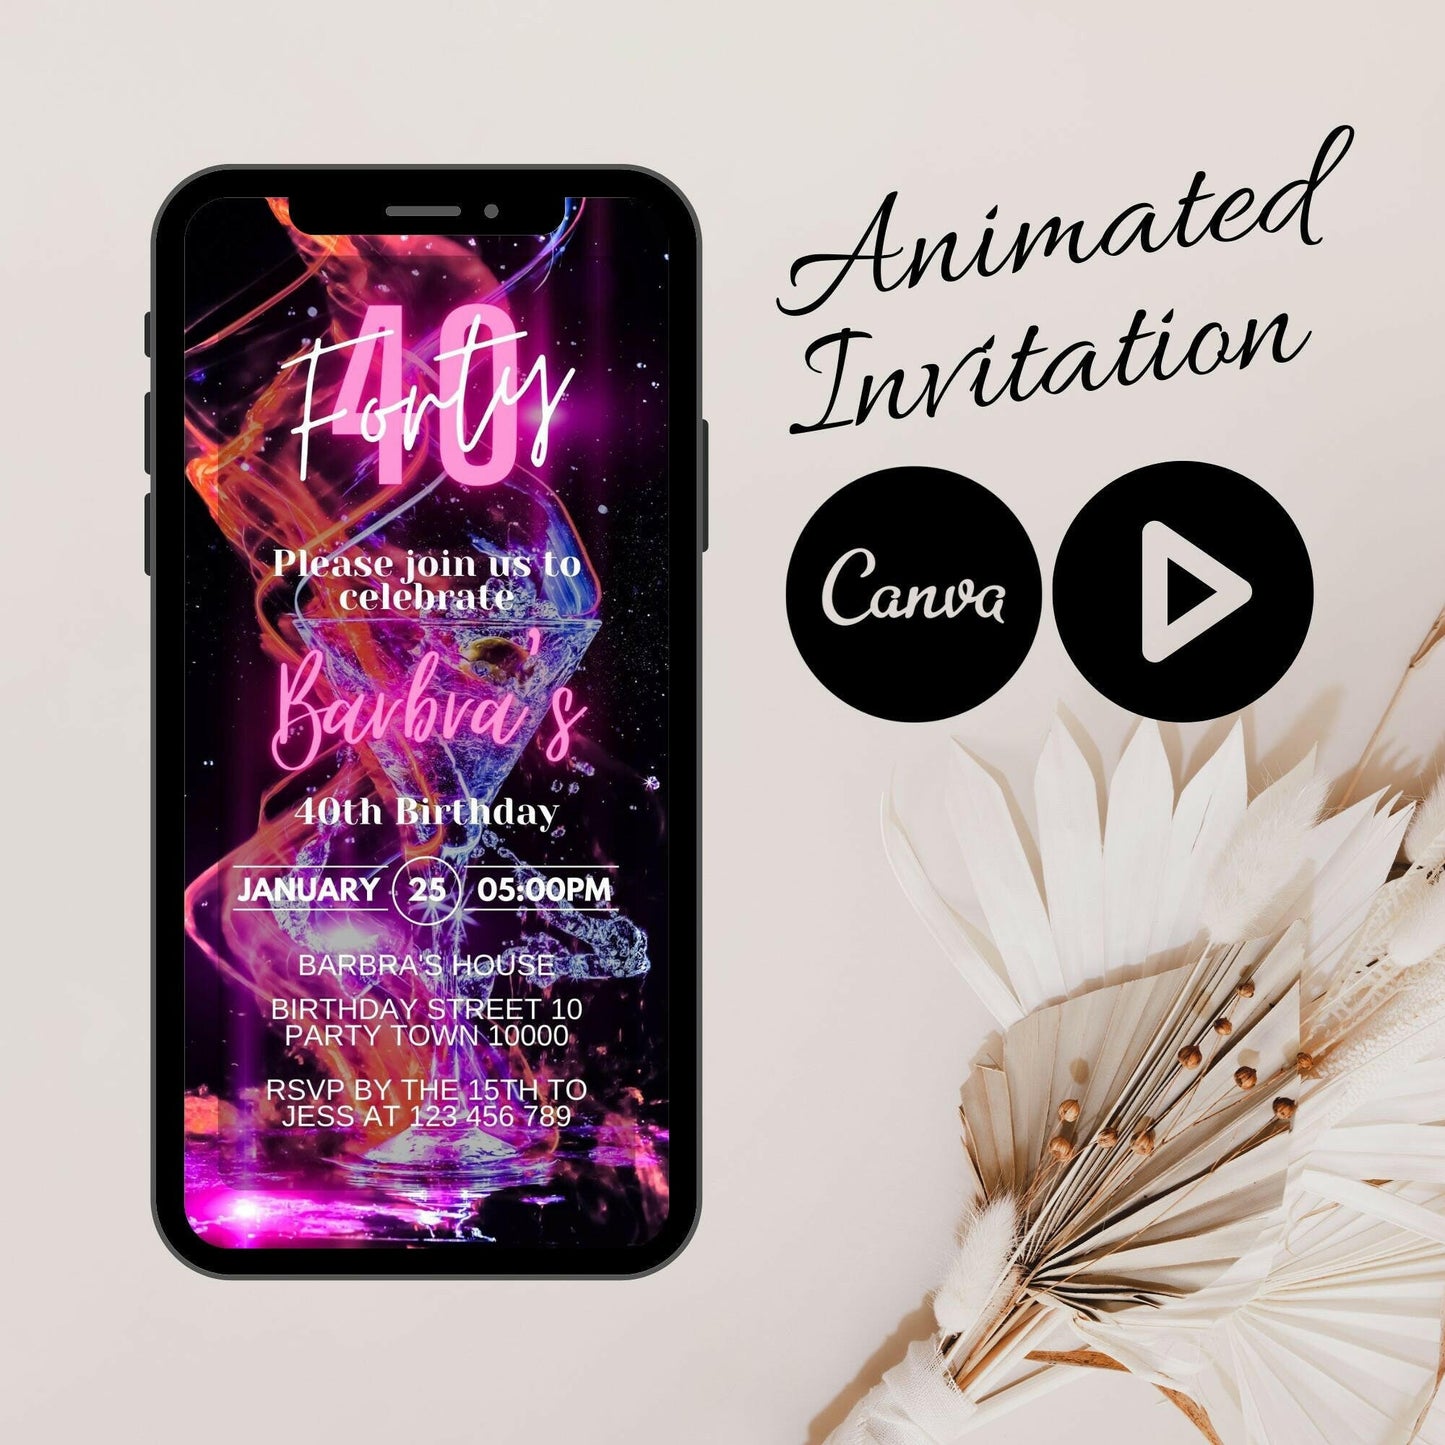 Neon Pink video invite, Invitation Birthday Party Invitation for her, Animated Mobile Birthday Invitation, Modern Birthday Canva Invitation